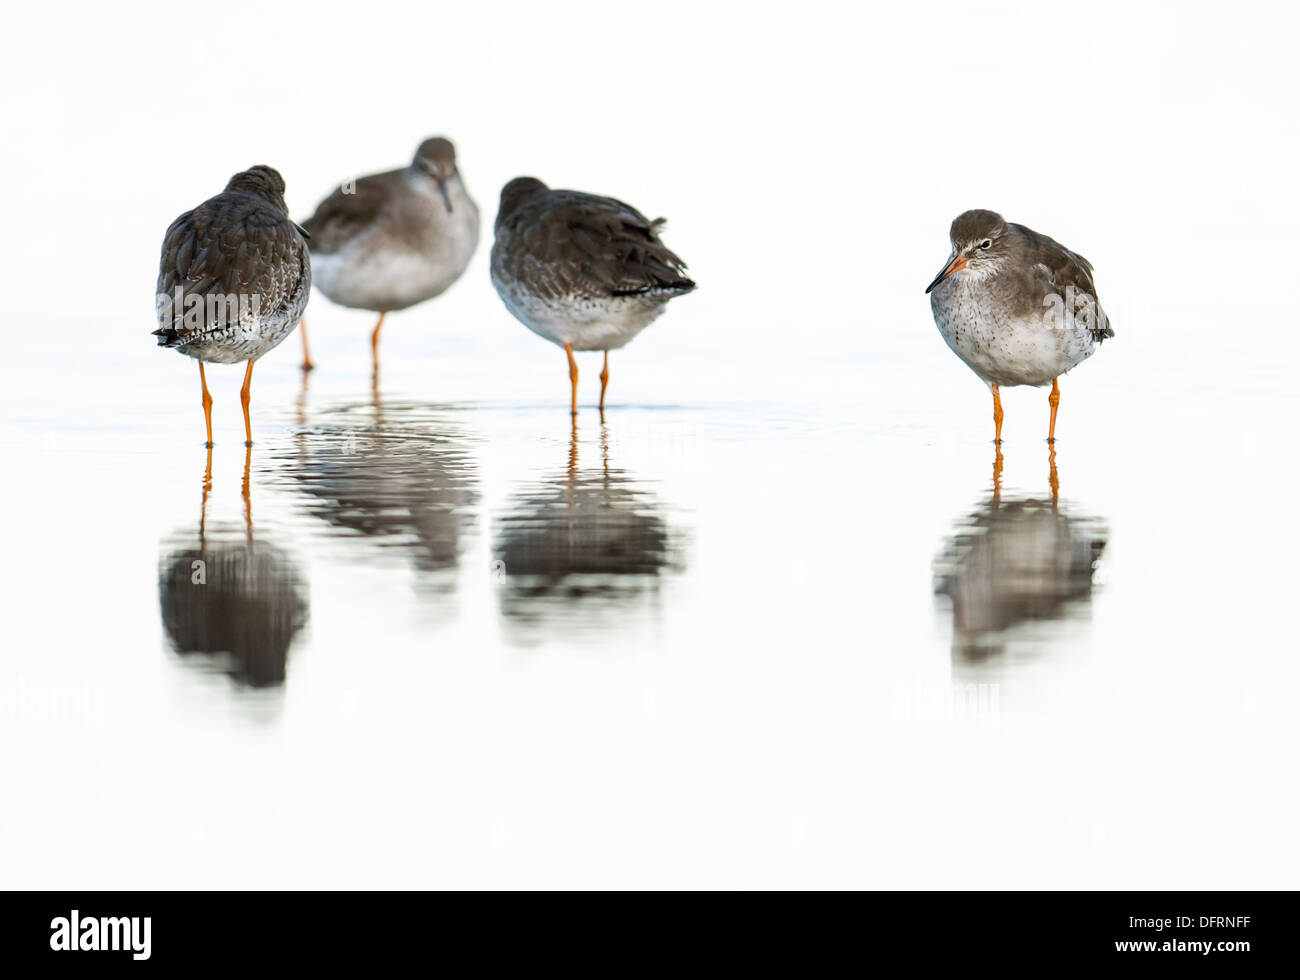 A group of Redshanks wading in shallow water Stock Photo